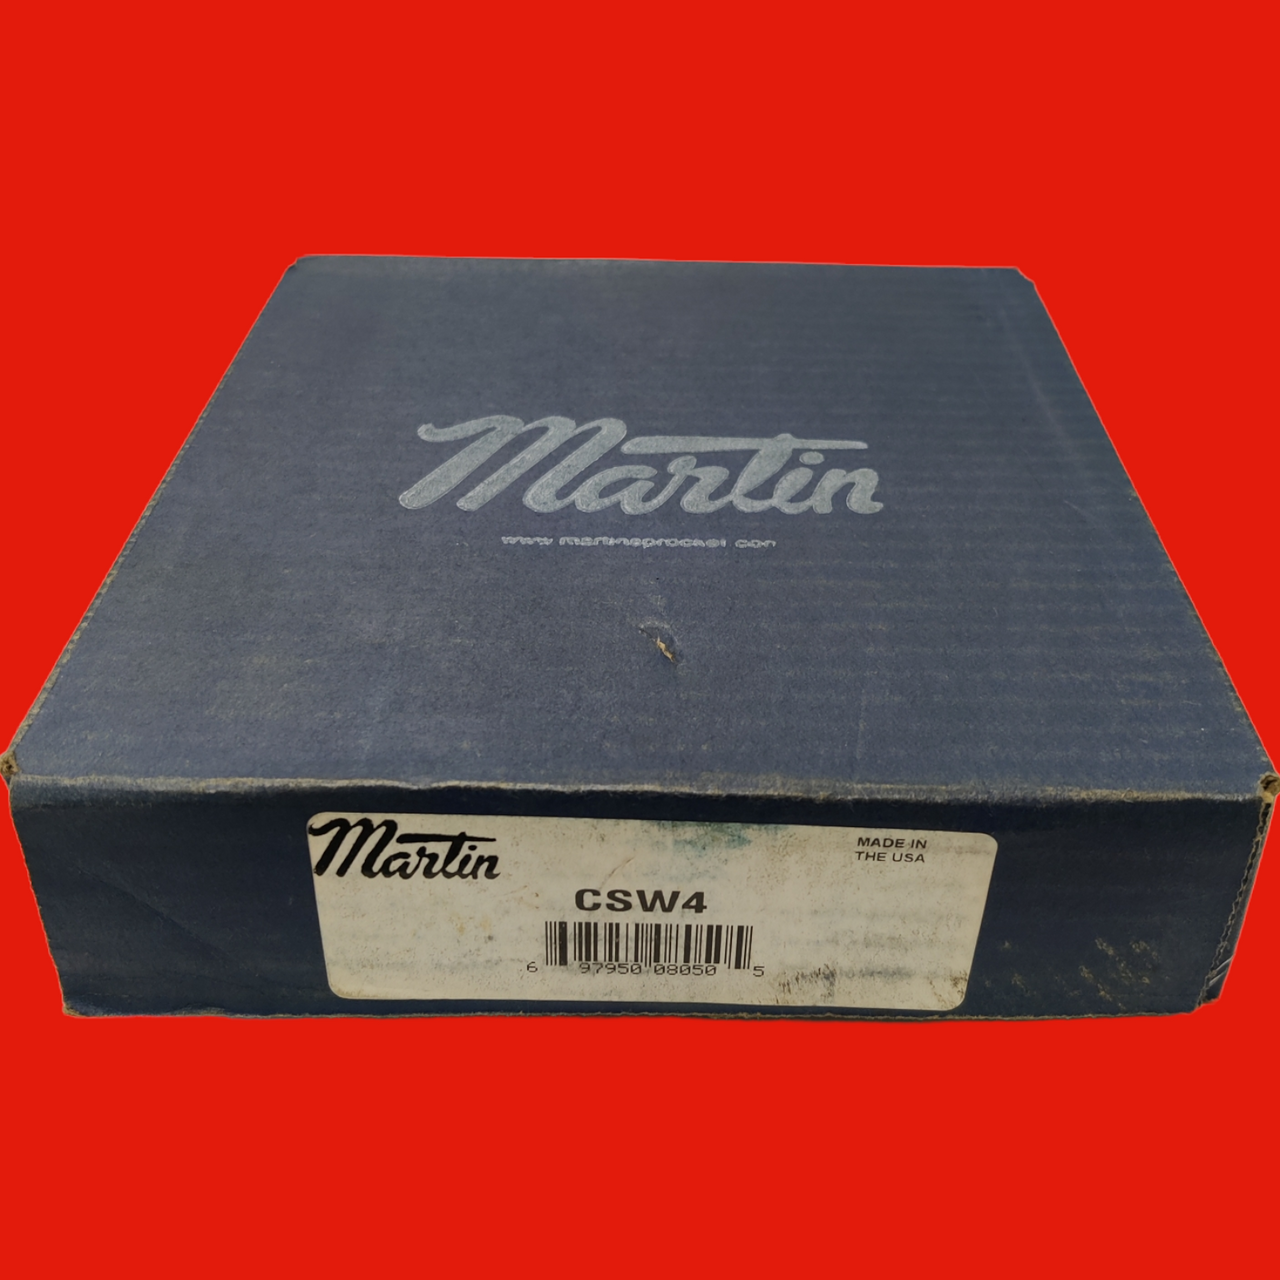 Martin CSW4 2" Waste Pack Seal